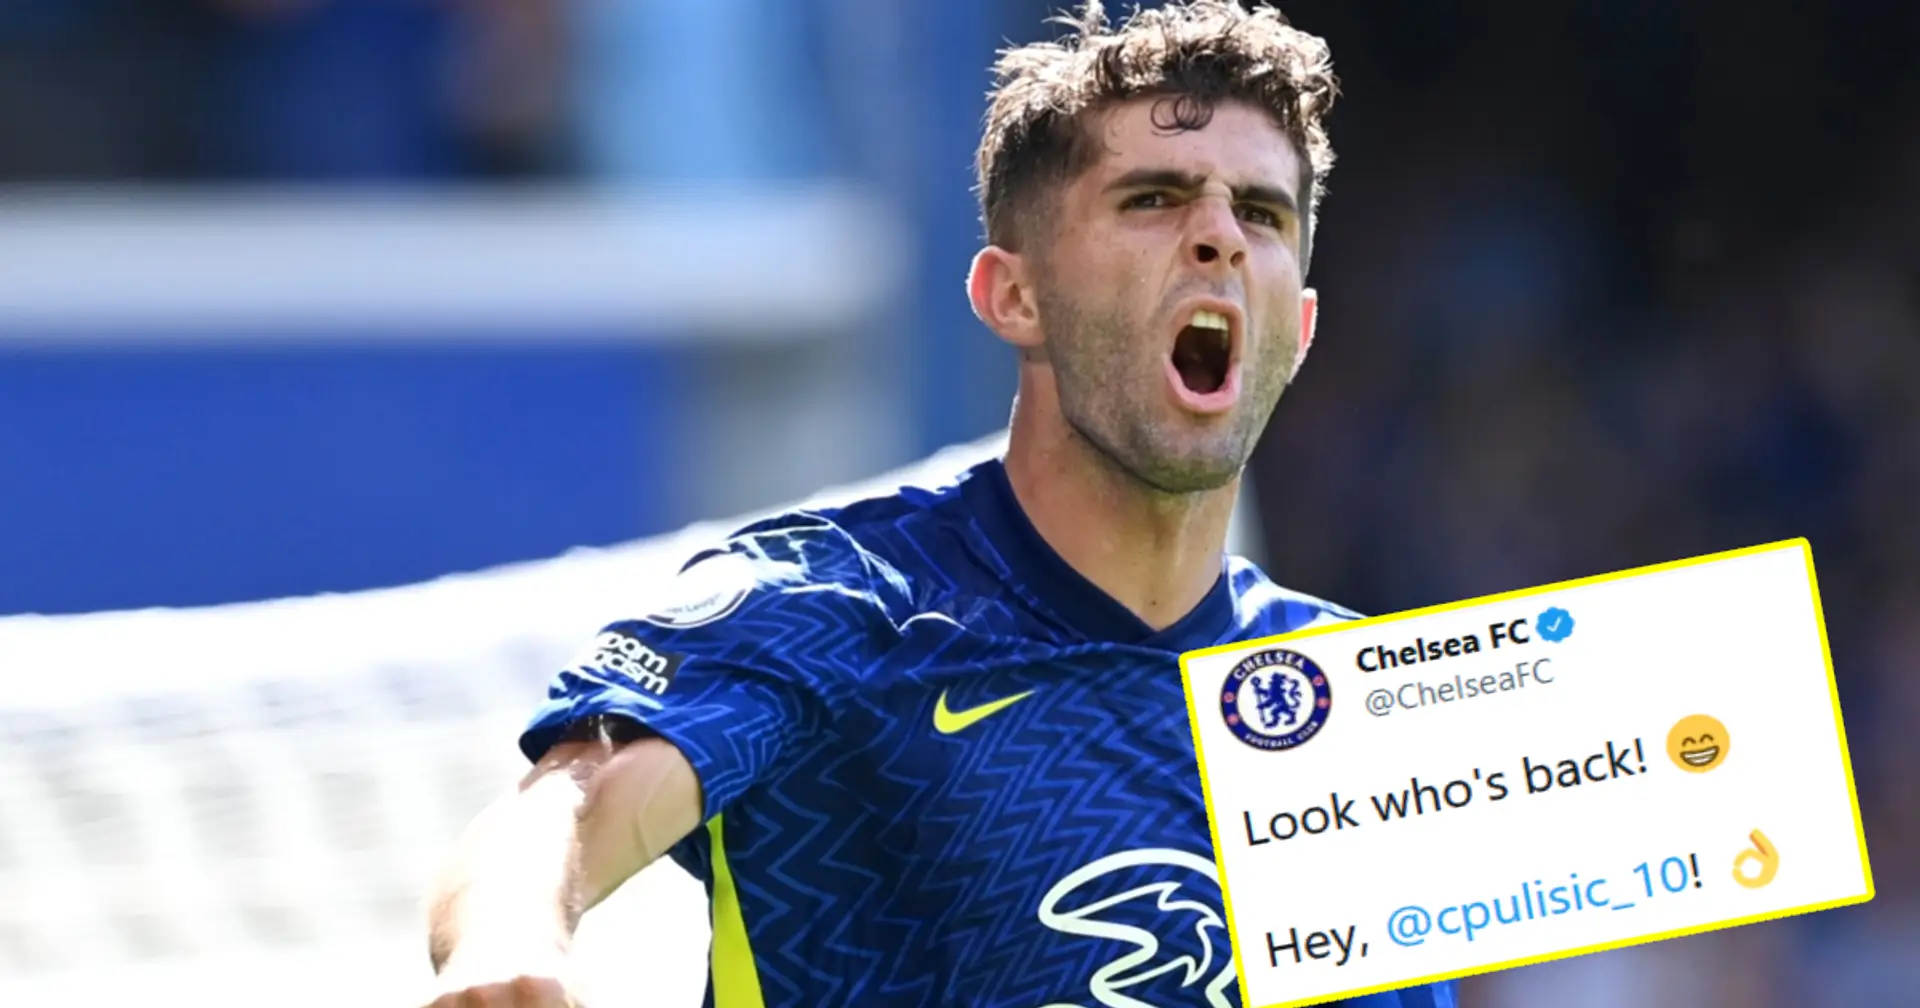 'Welcome back Captain America': Chelsea fans welcome Pulisic from injury ahead of Malmo clash